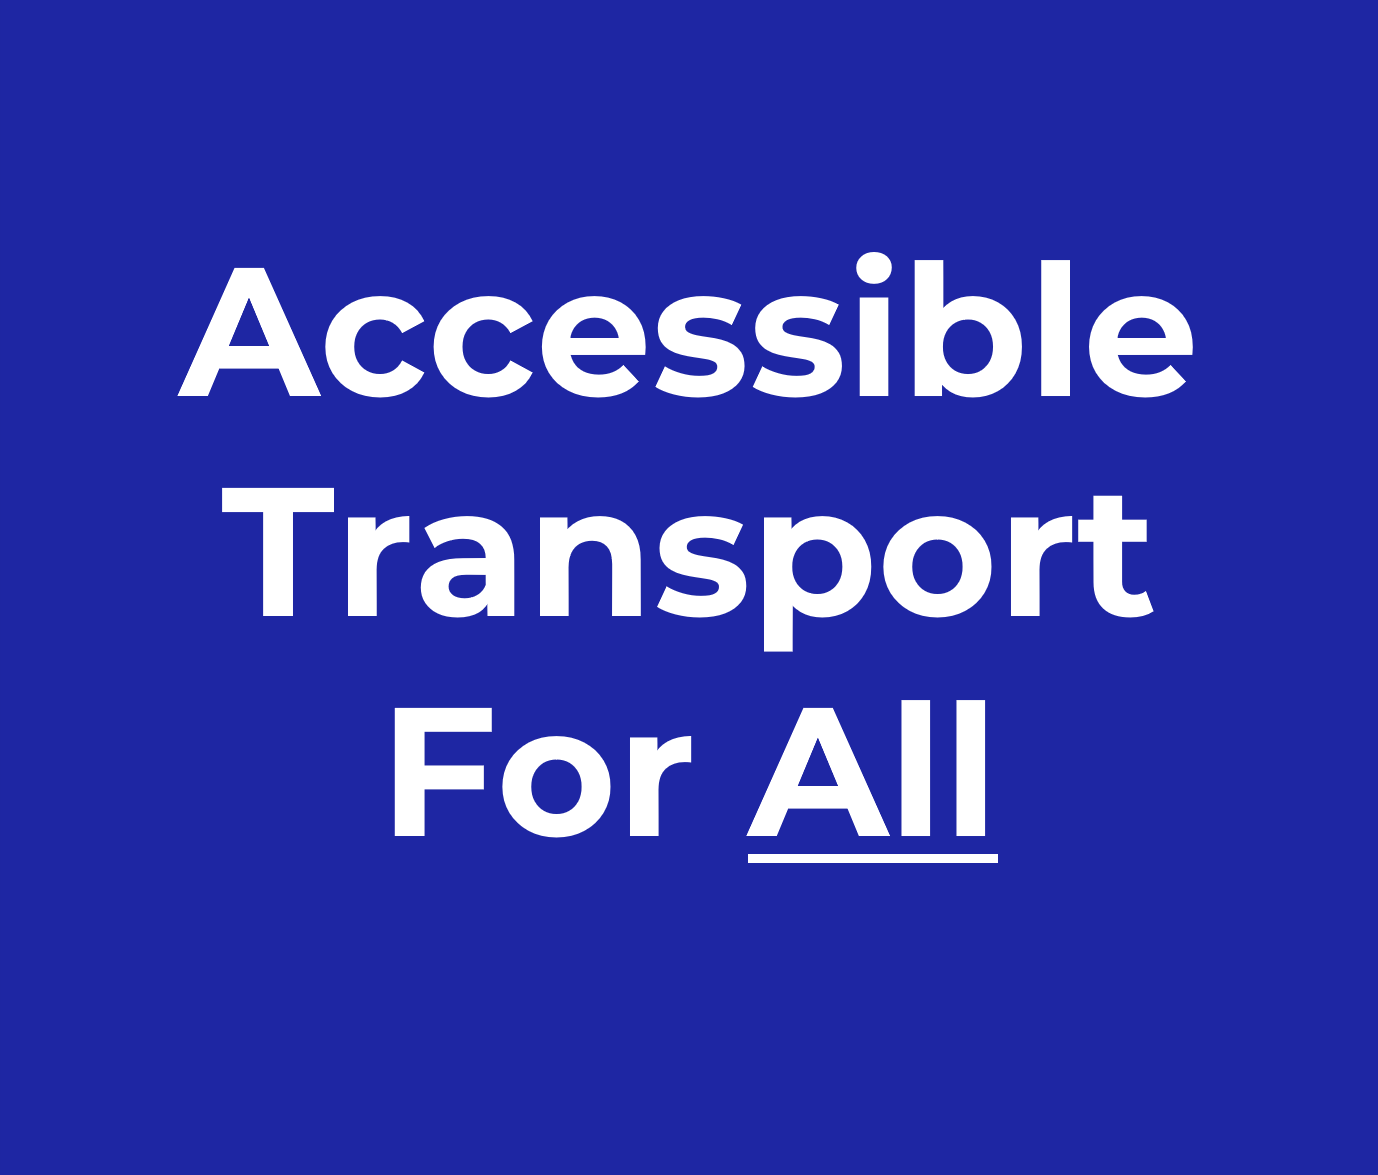 Accessible Transport for All